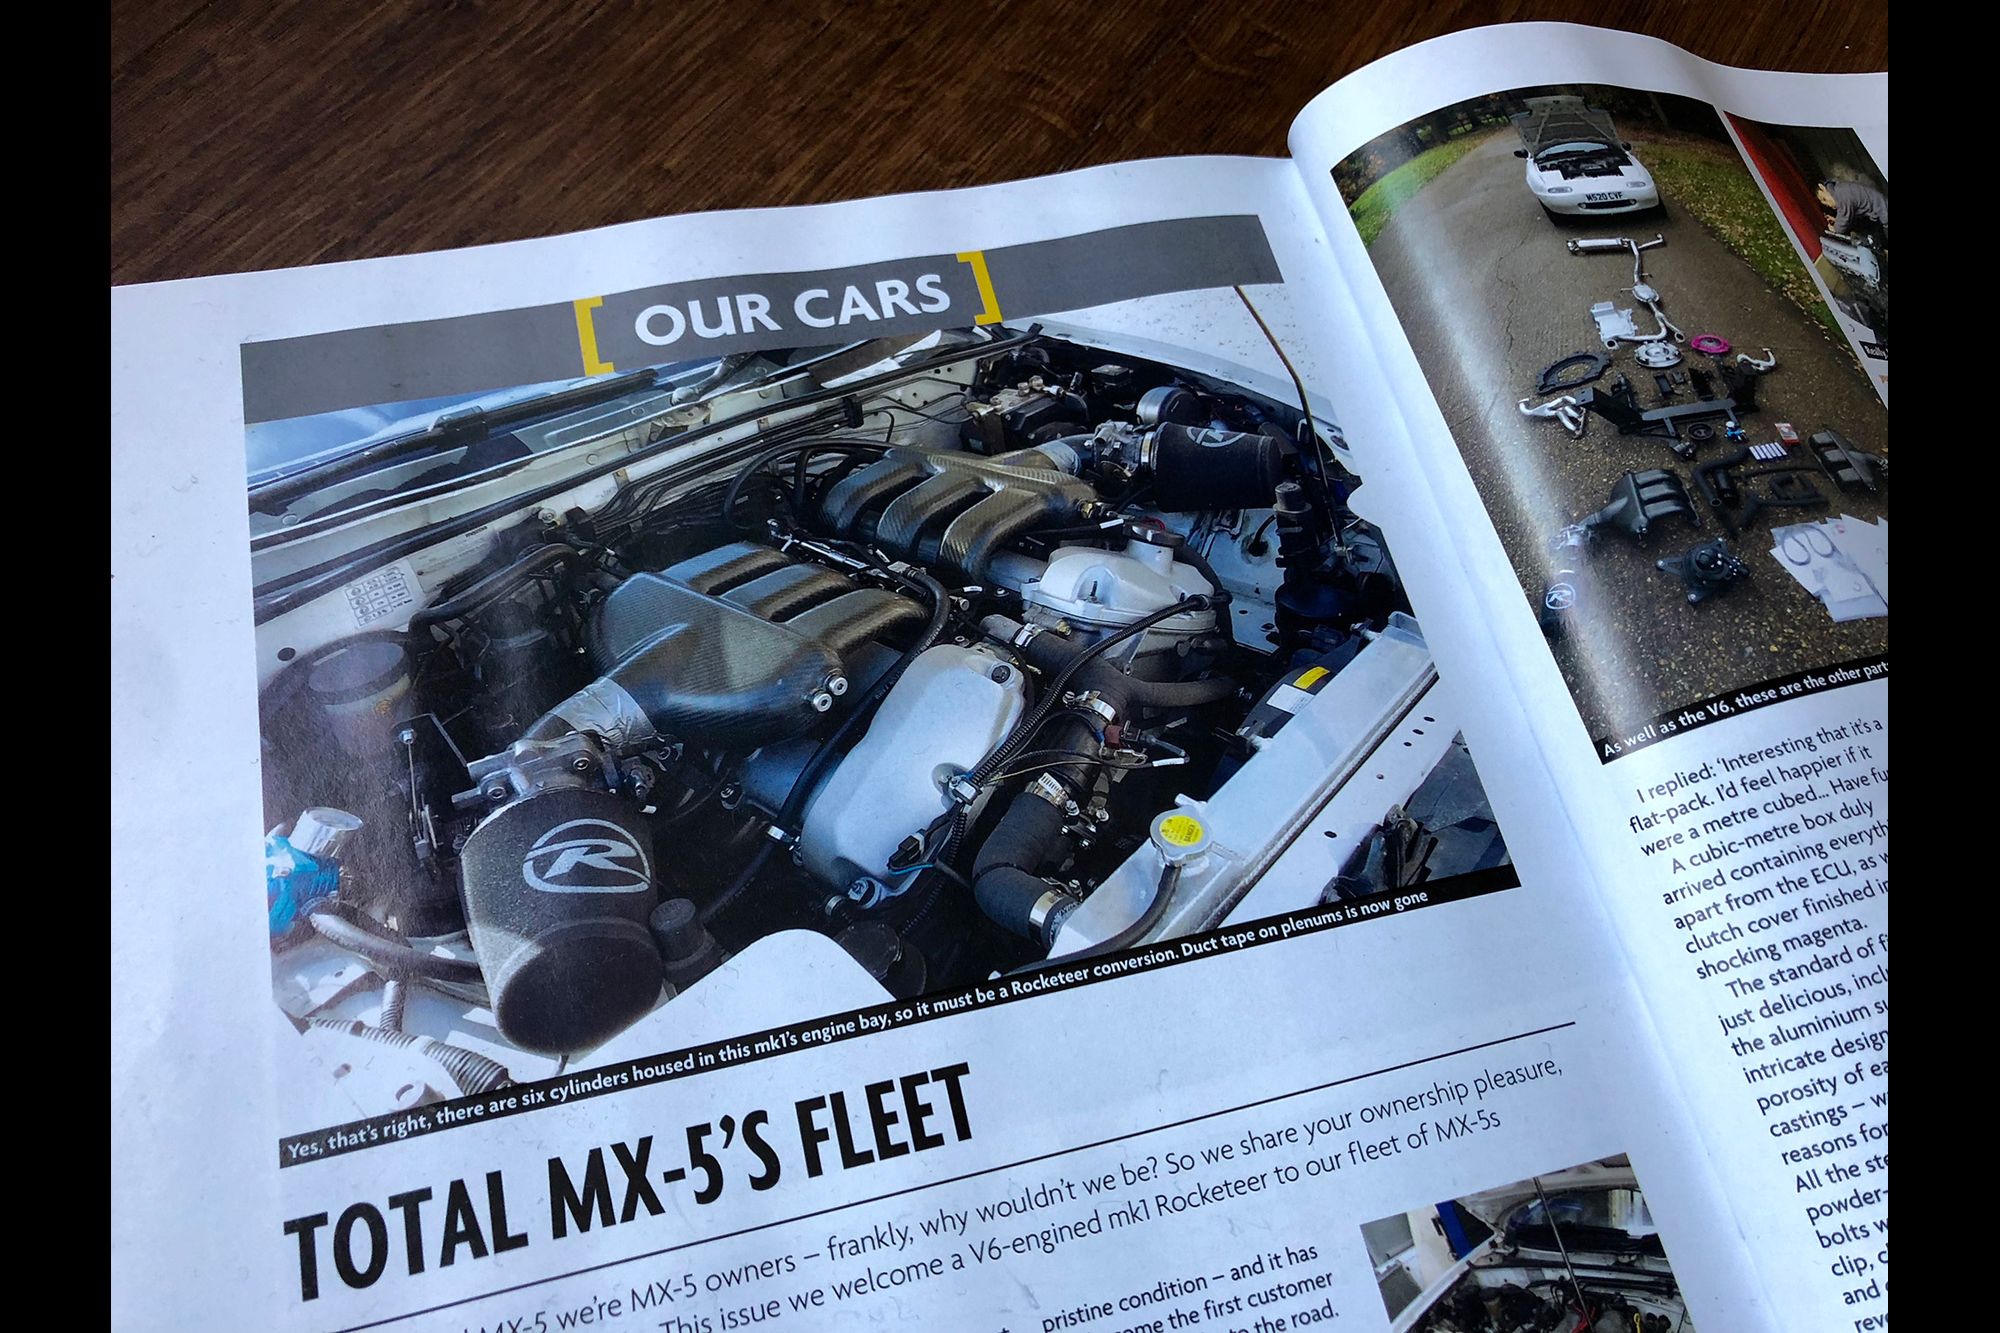 MXV6 joins the Total MX-5 fleet - Issue 8 reveals the start of the self-build process